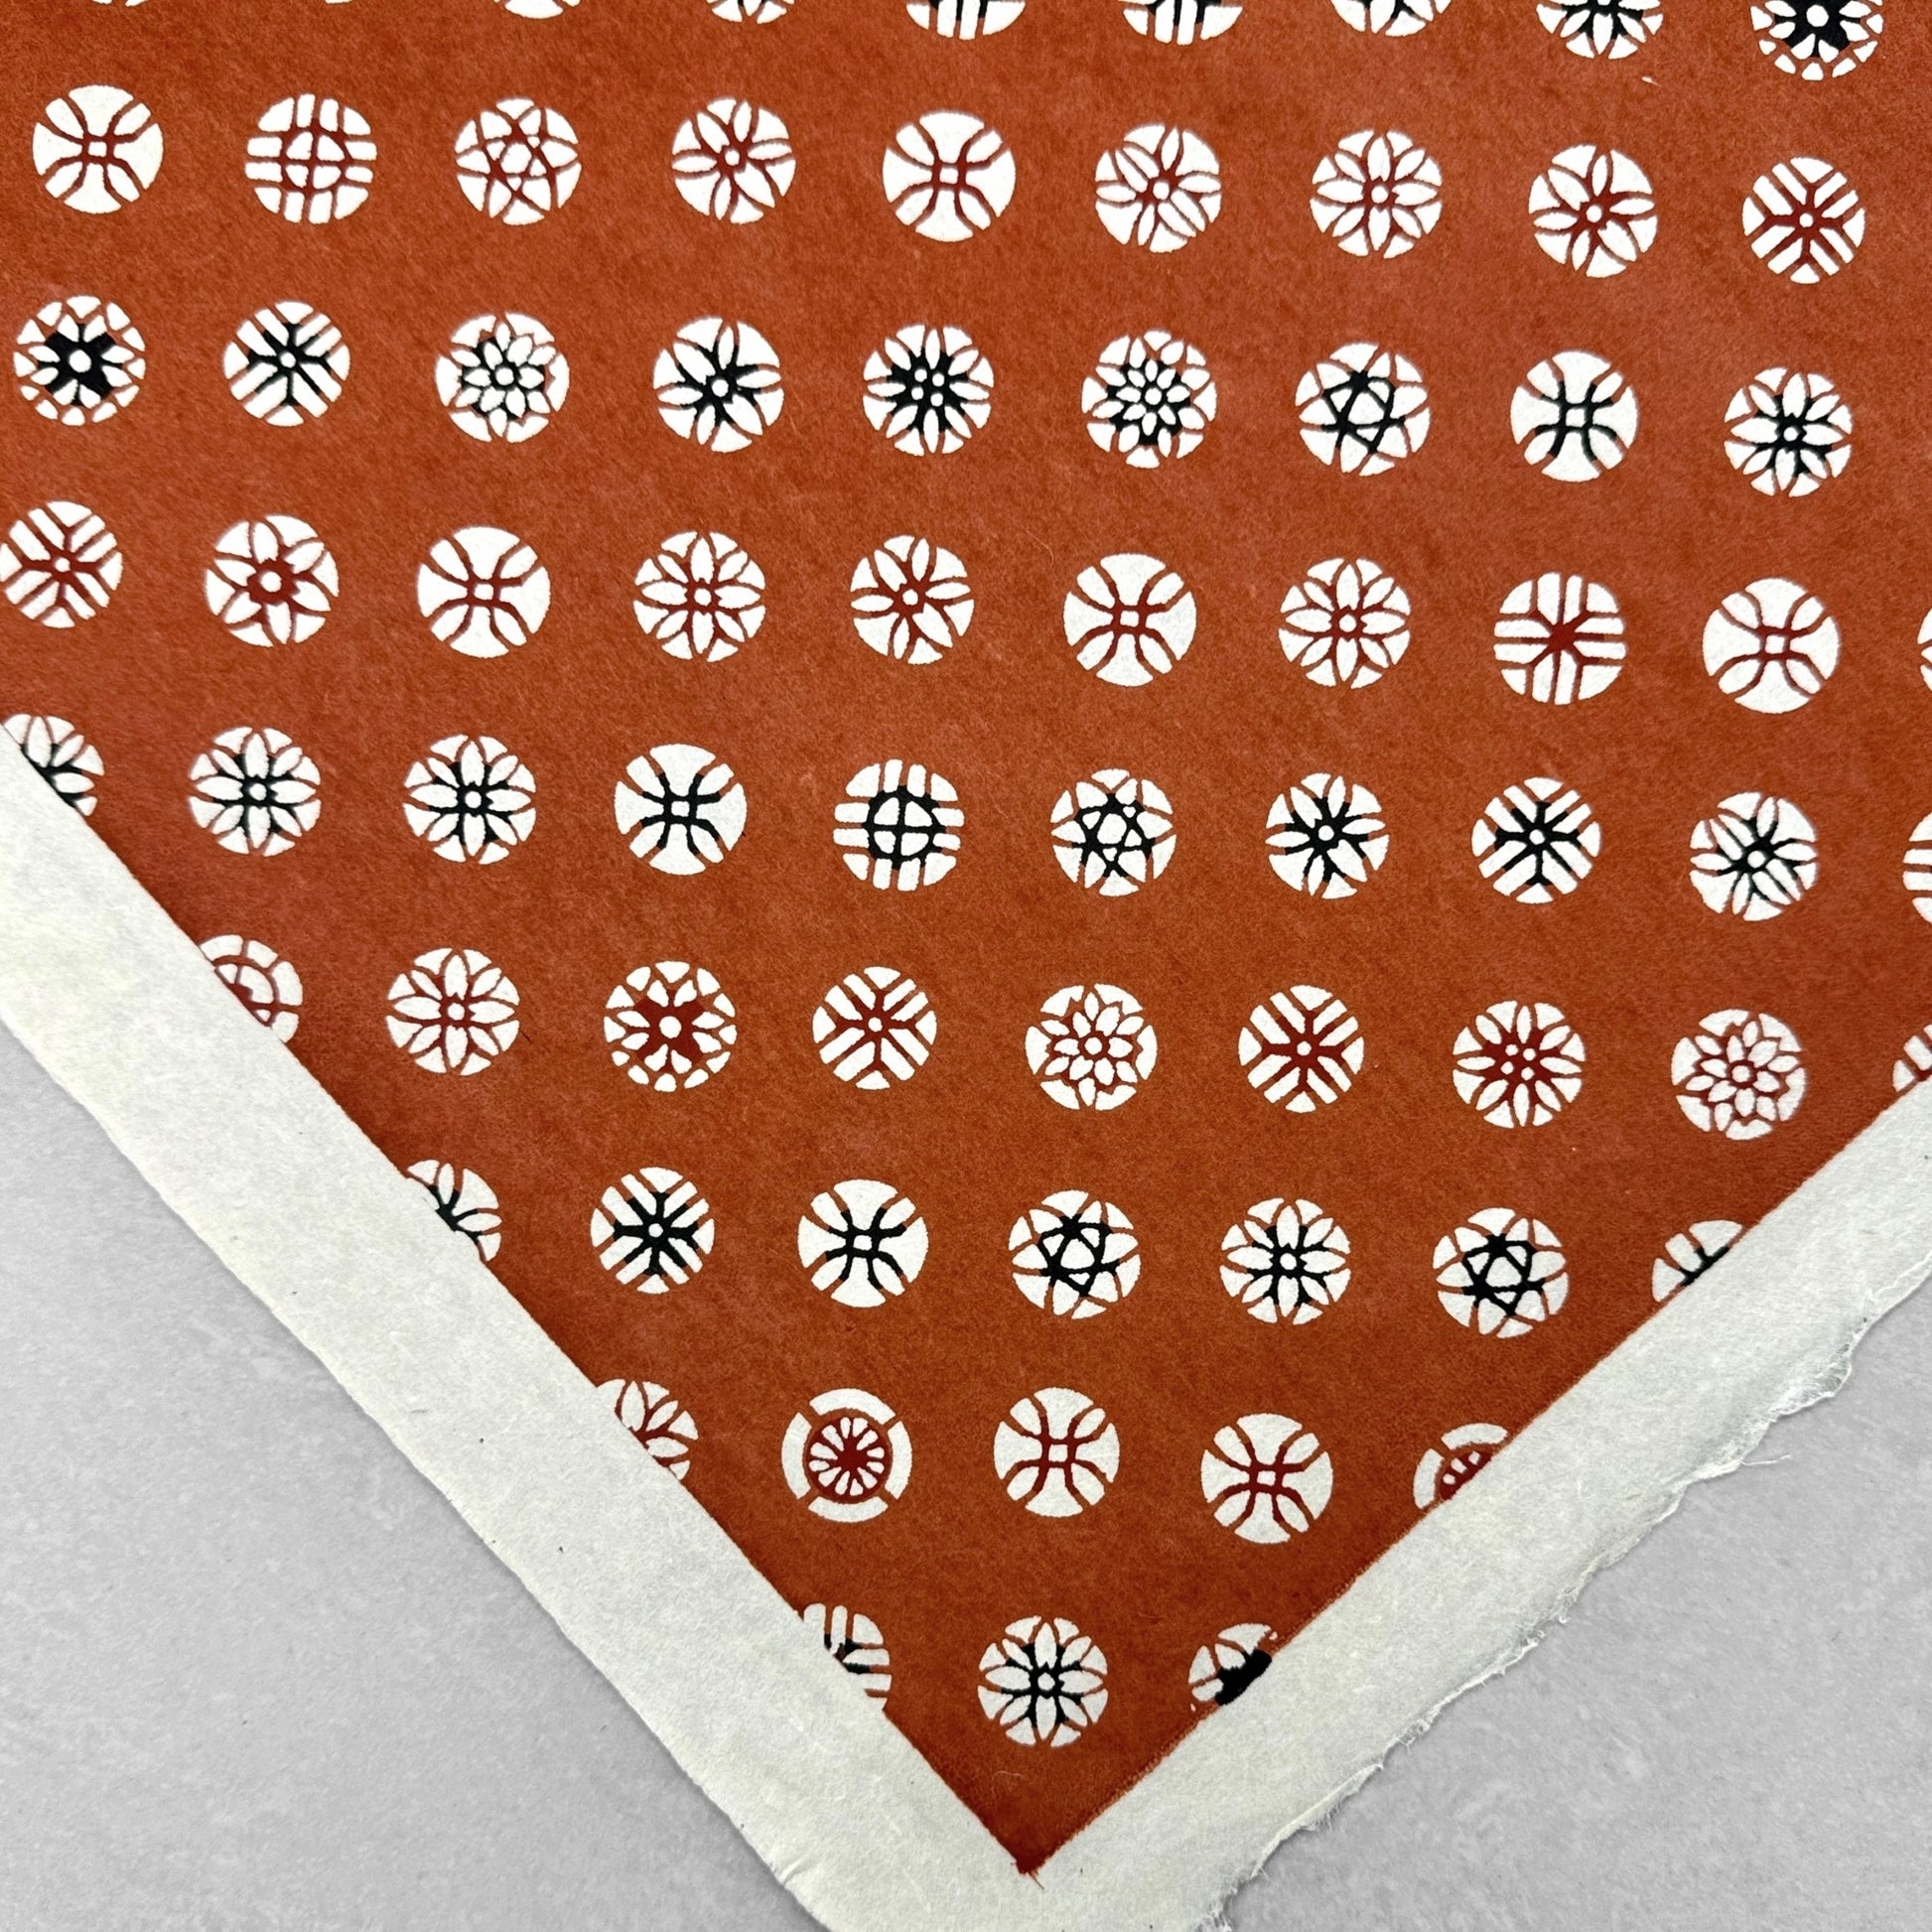 A Japanese stencil-dyed patterned paper with a repeat pattern of floral motif circles on a rich tan brown base. Close up